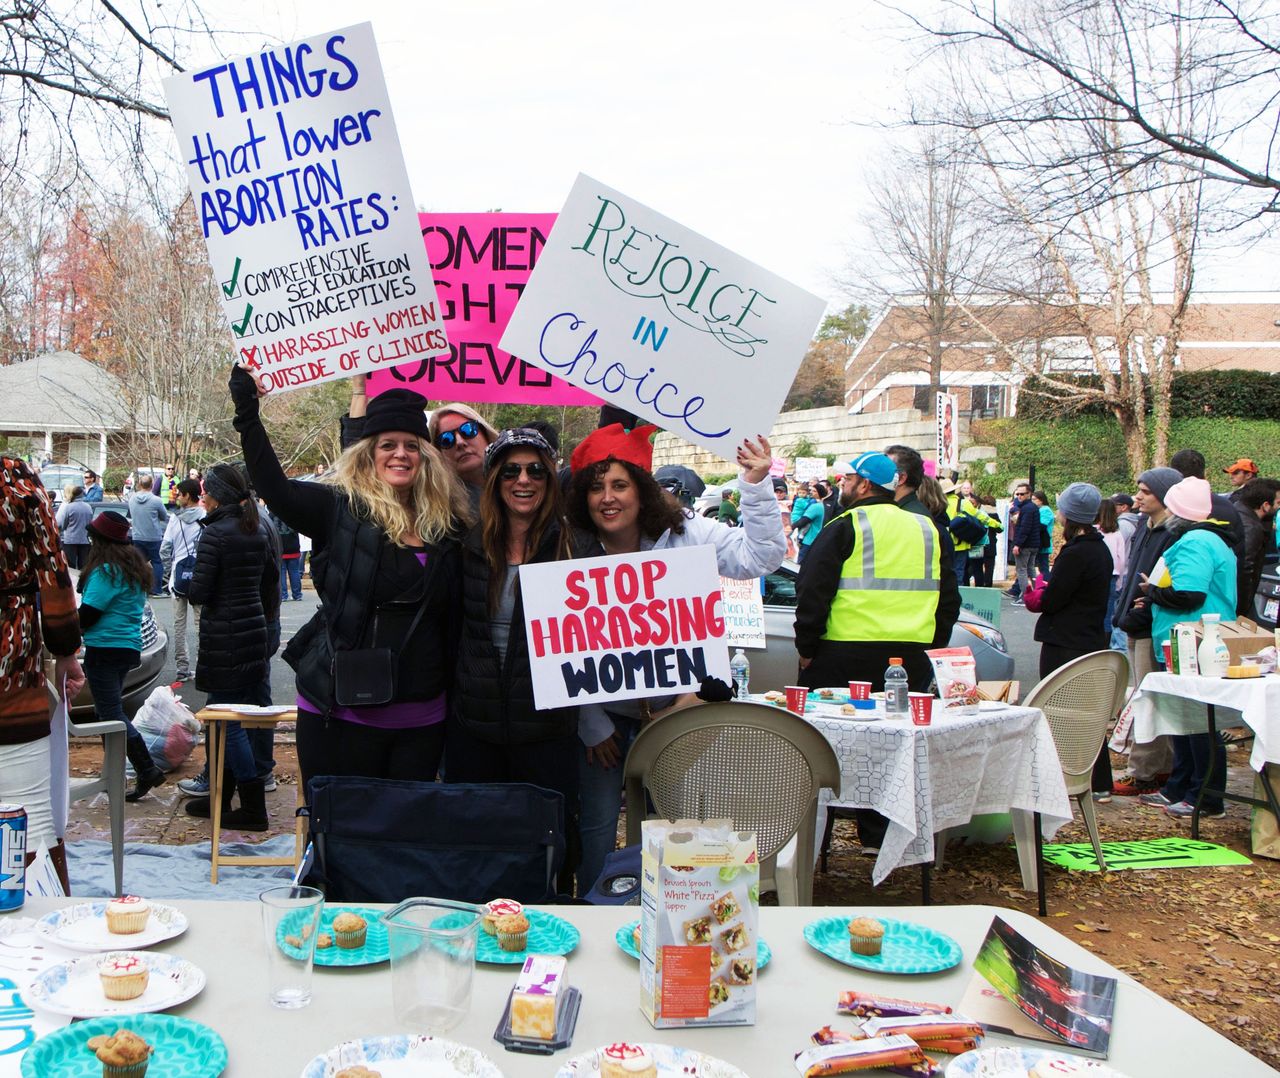 Members of Pro-Choice Charlotte host a "Pro Choice Picnic" outside the clinic.